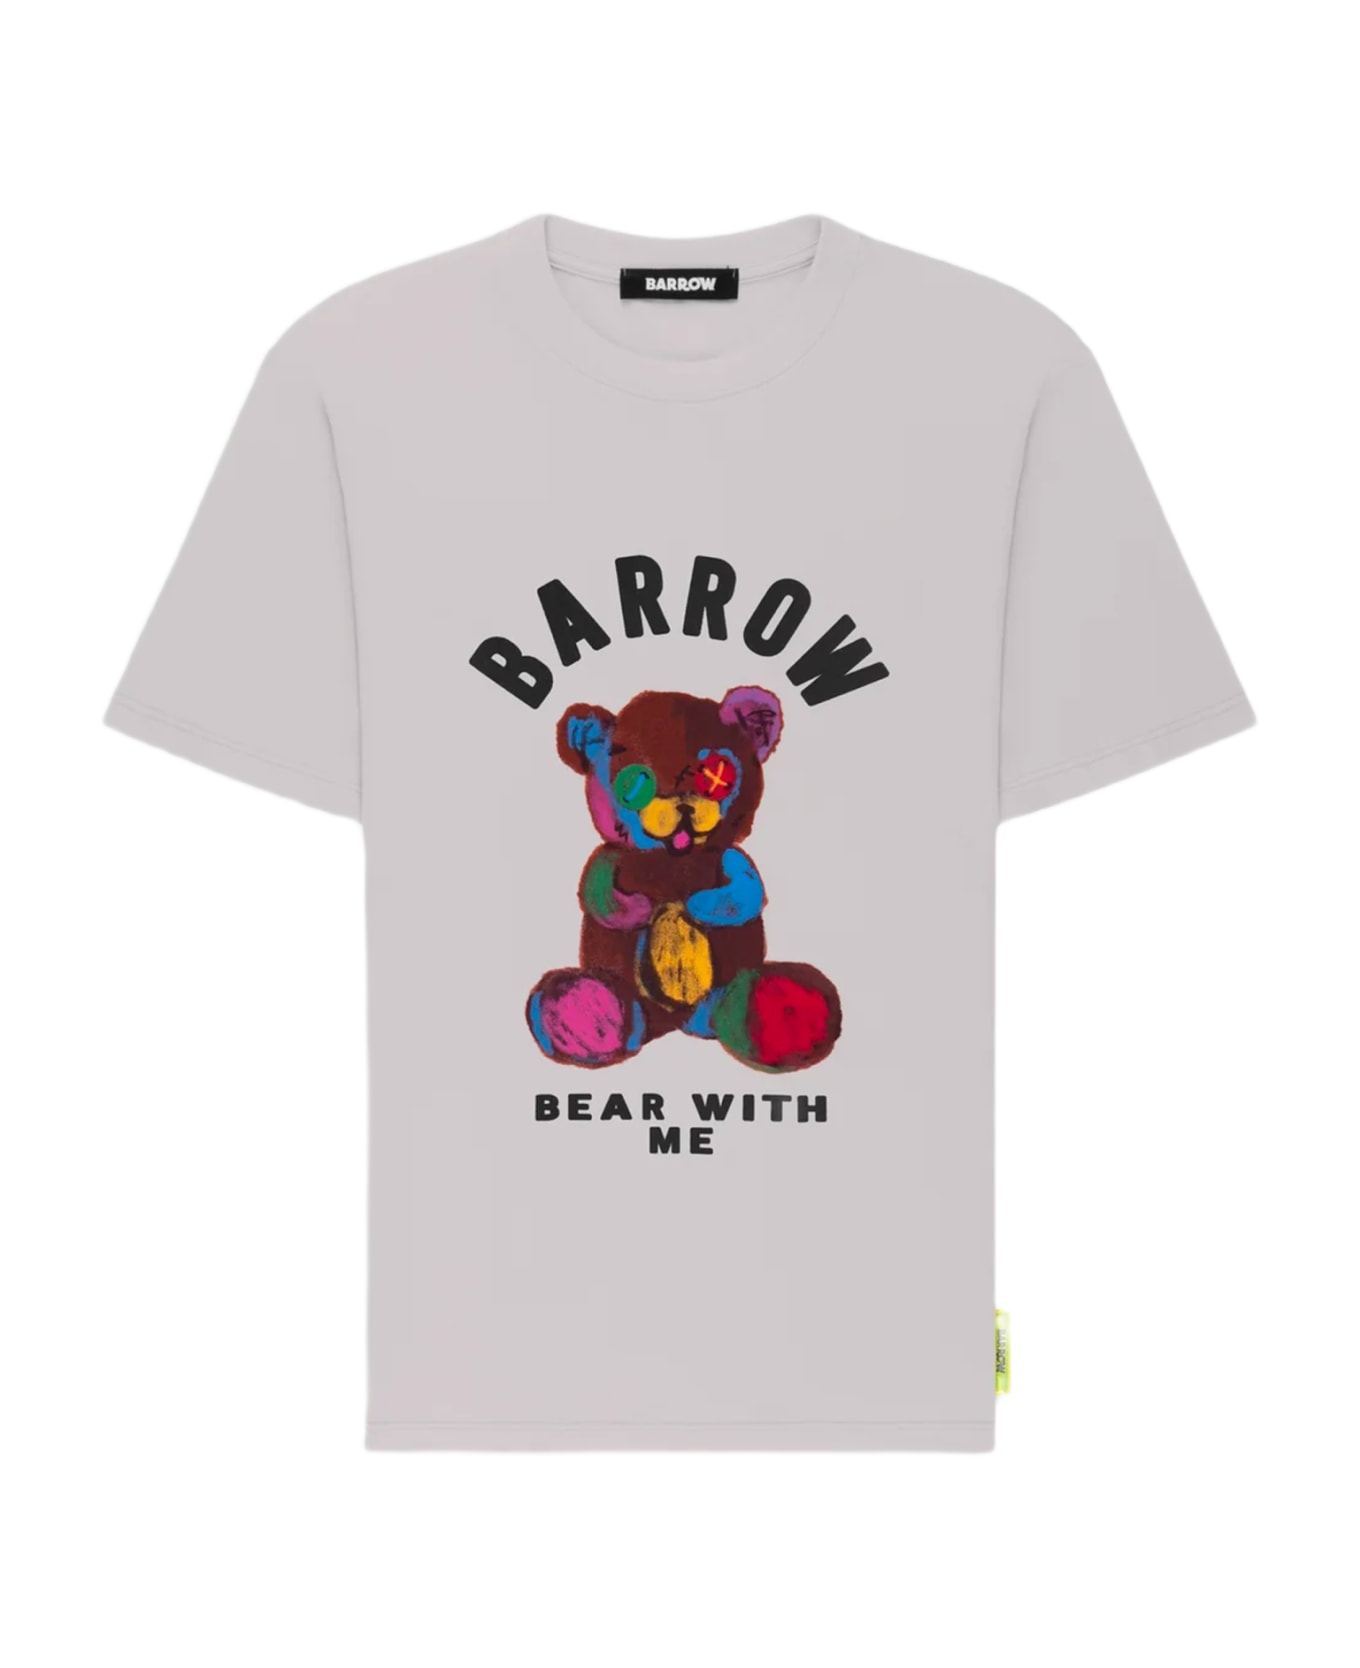 Barrow Jersey T-shirt Unisex Off white cotton t-shirt with Teddy bear front print - Crema シャツ